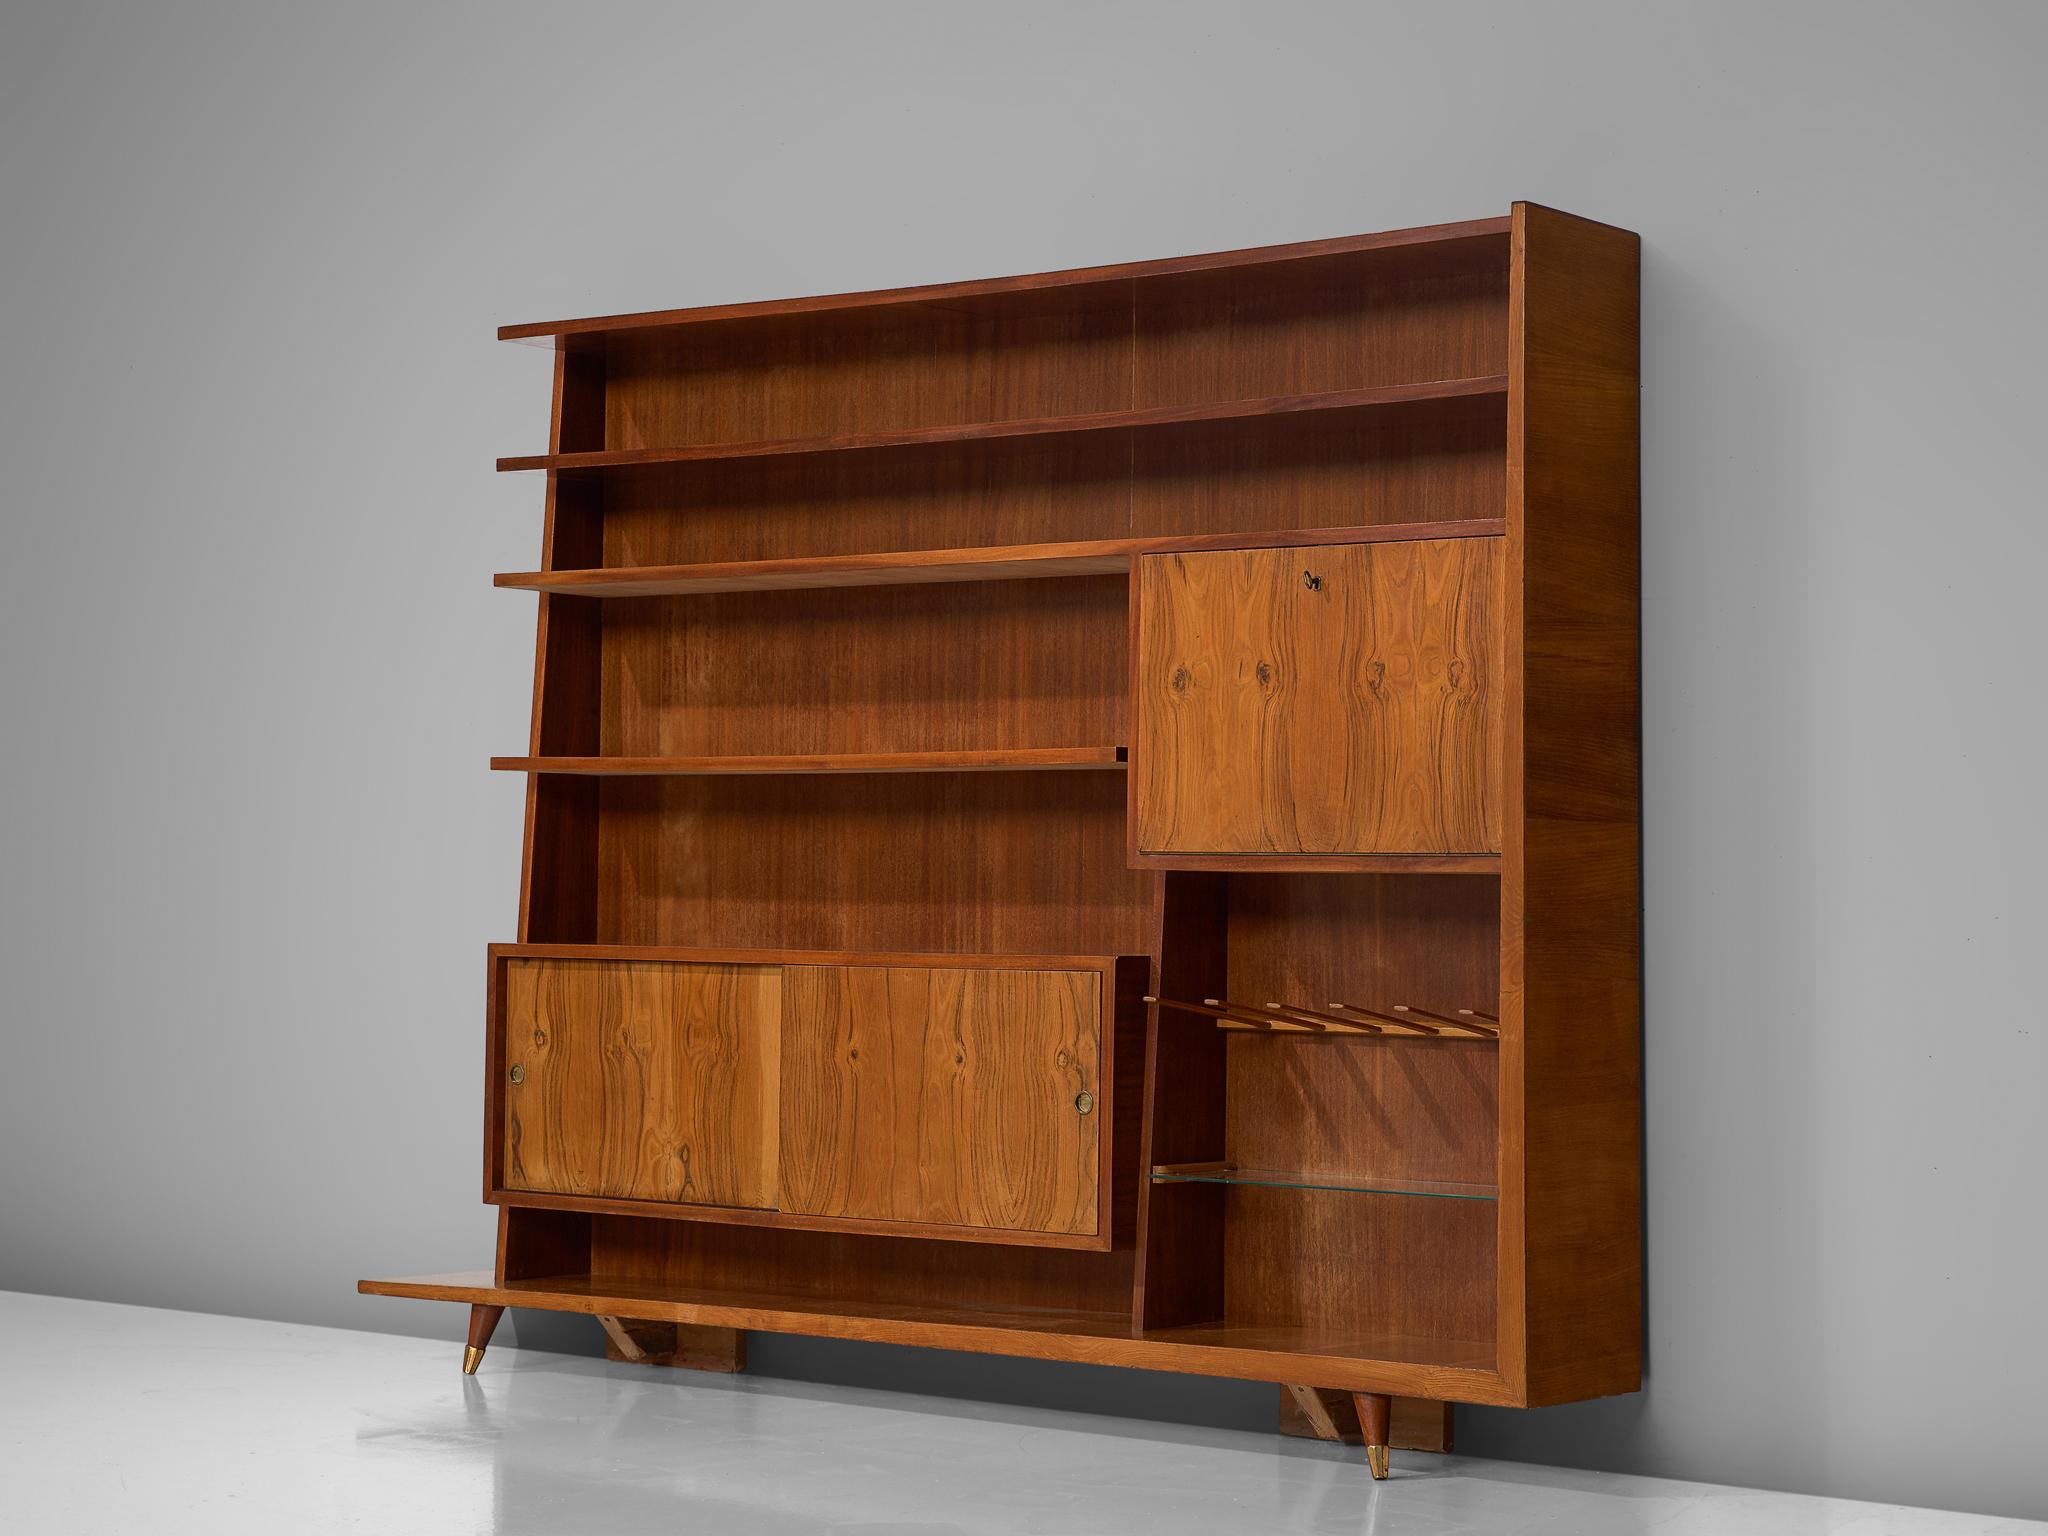 Bookcase, oak, walnut, brass and glass, Italy, circa 1950.

This sophisticated, large bookcase designed in Italy comes in a great size. With a nice variety of storage compartment and shelves, this pieces offers plenty of storage space and options to